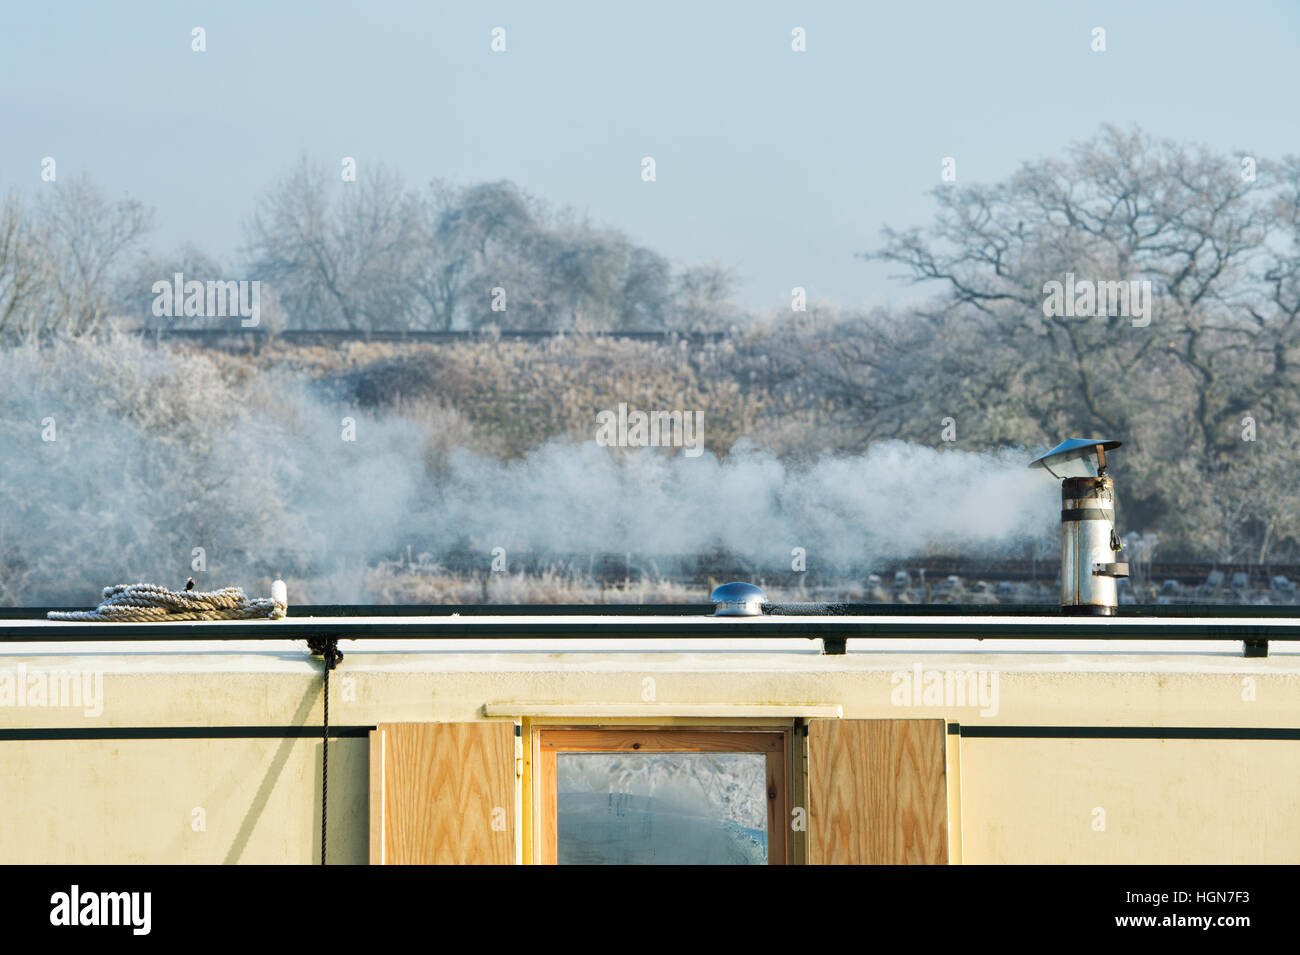 Canal boat chimney and smoke on a frosty December morning. Aynho, Banbury, Oxfordshire, England Stock Photo